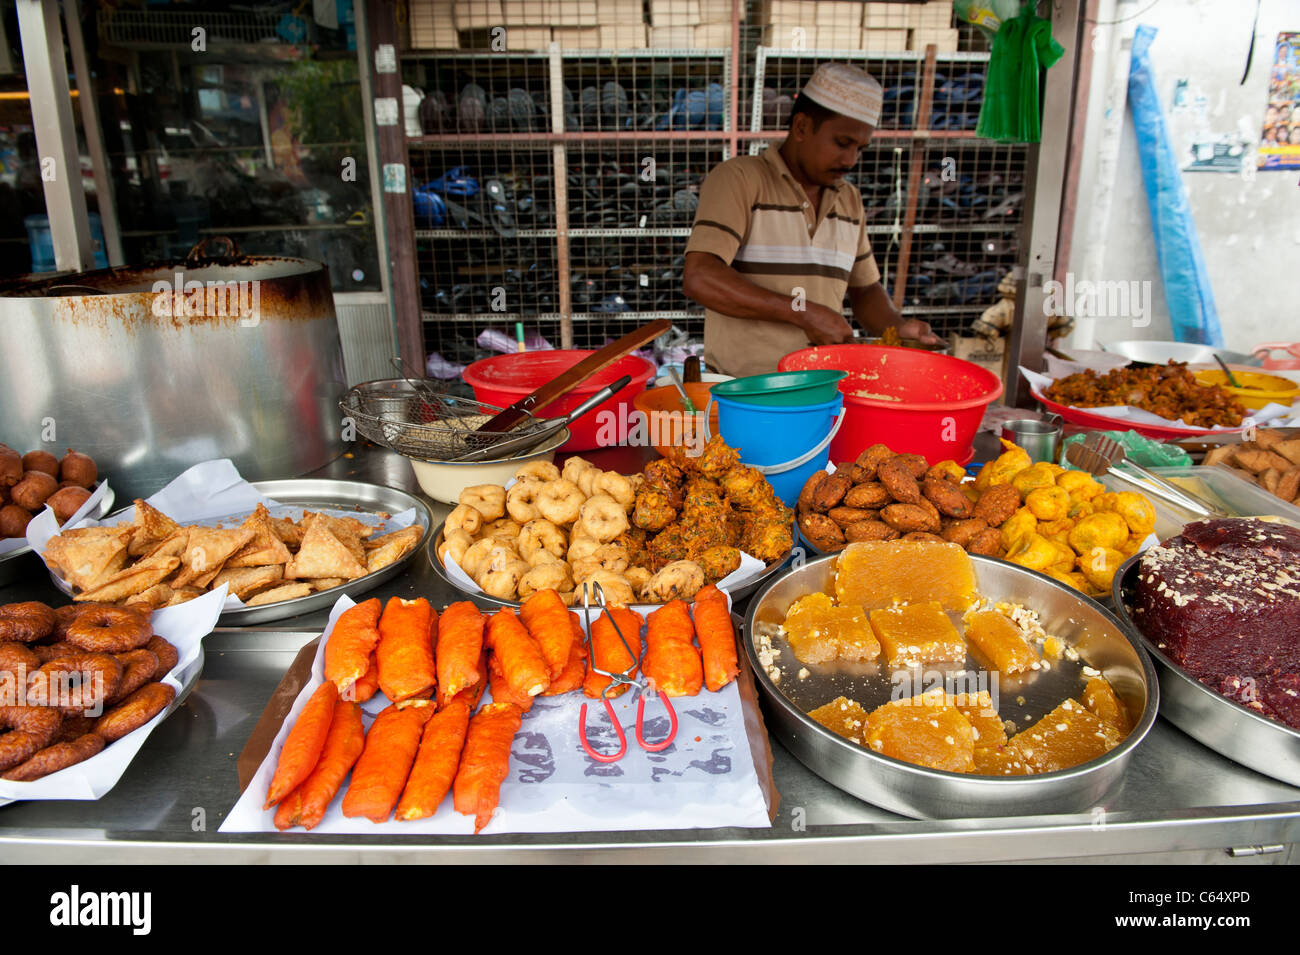 Indian Spiced Sweets, Desserts and Deep Fried Snacks on a Market Stall in Little India, Penang, George Town, Malaysia Stock Photo